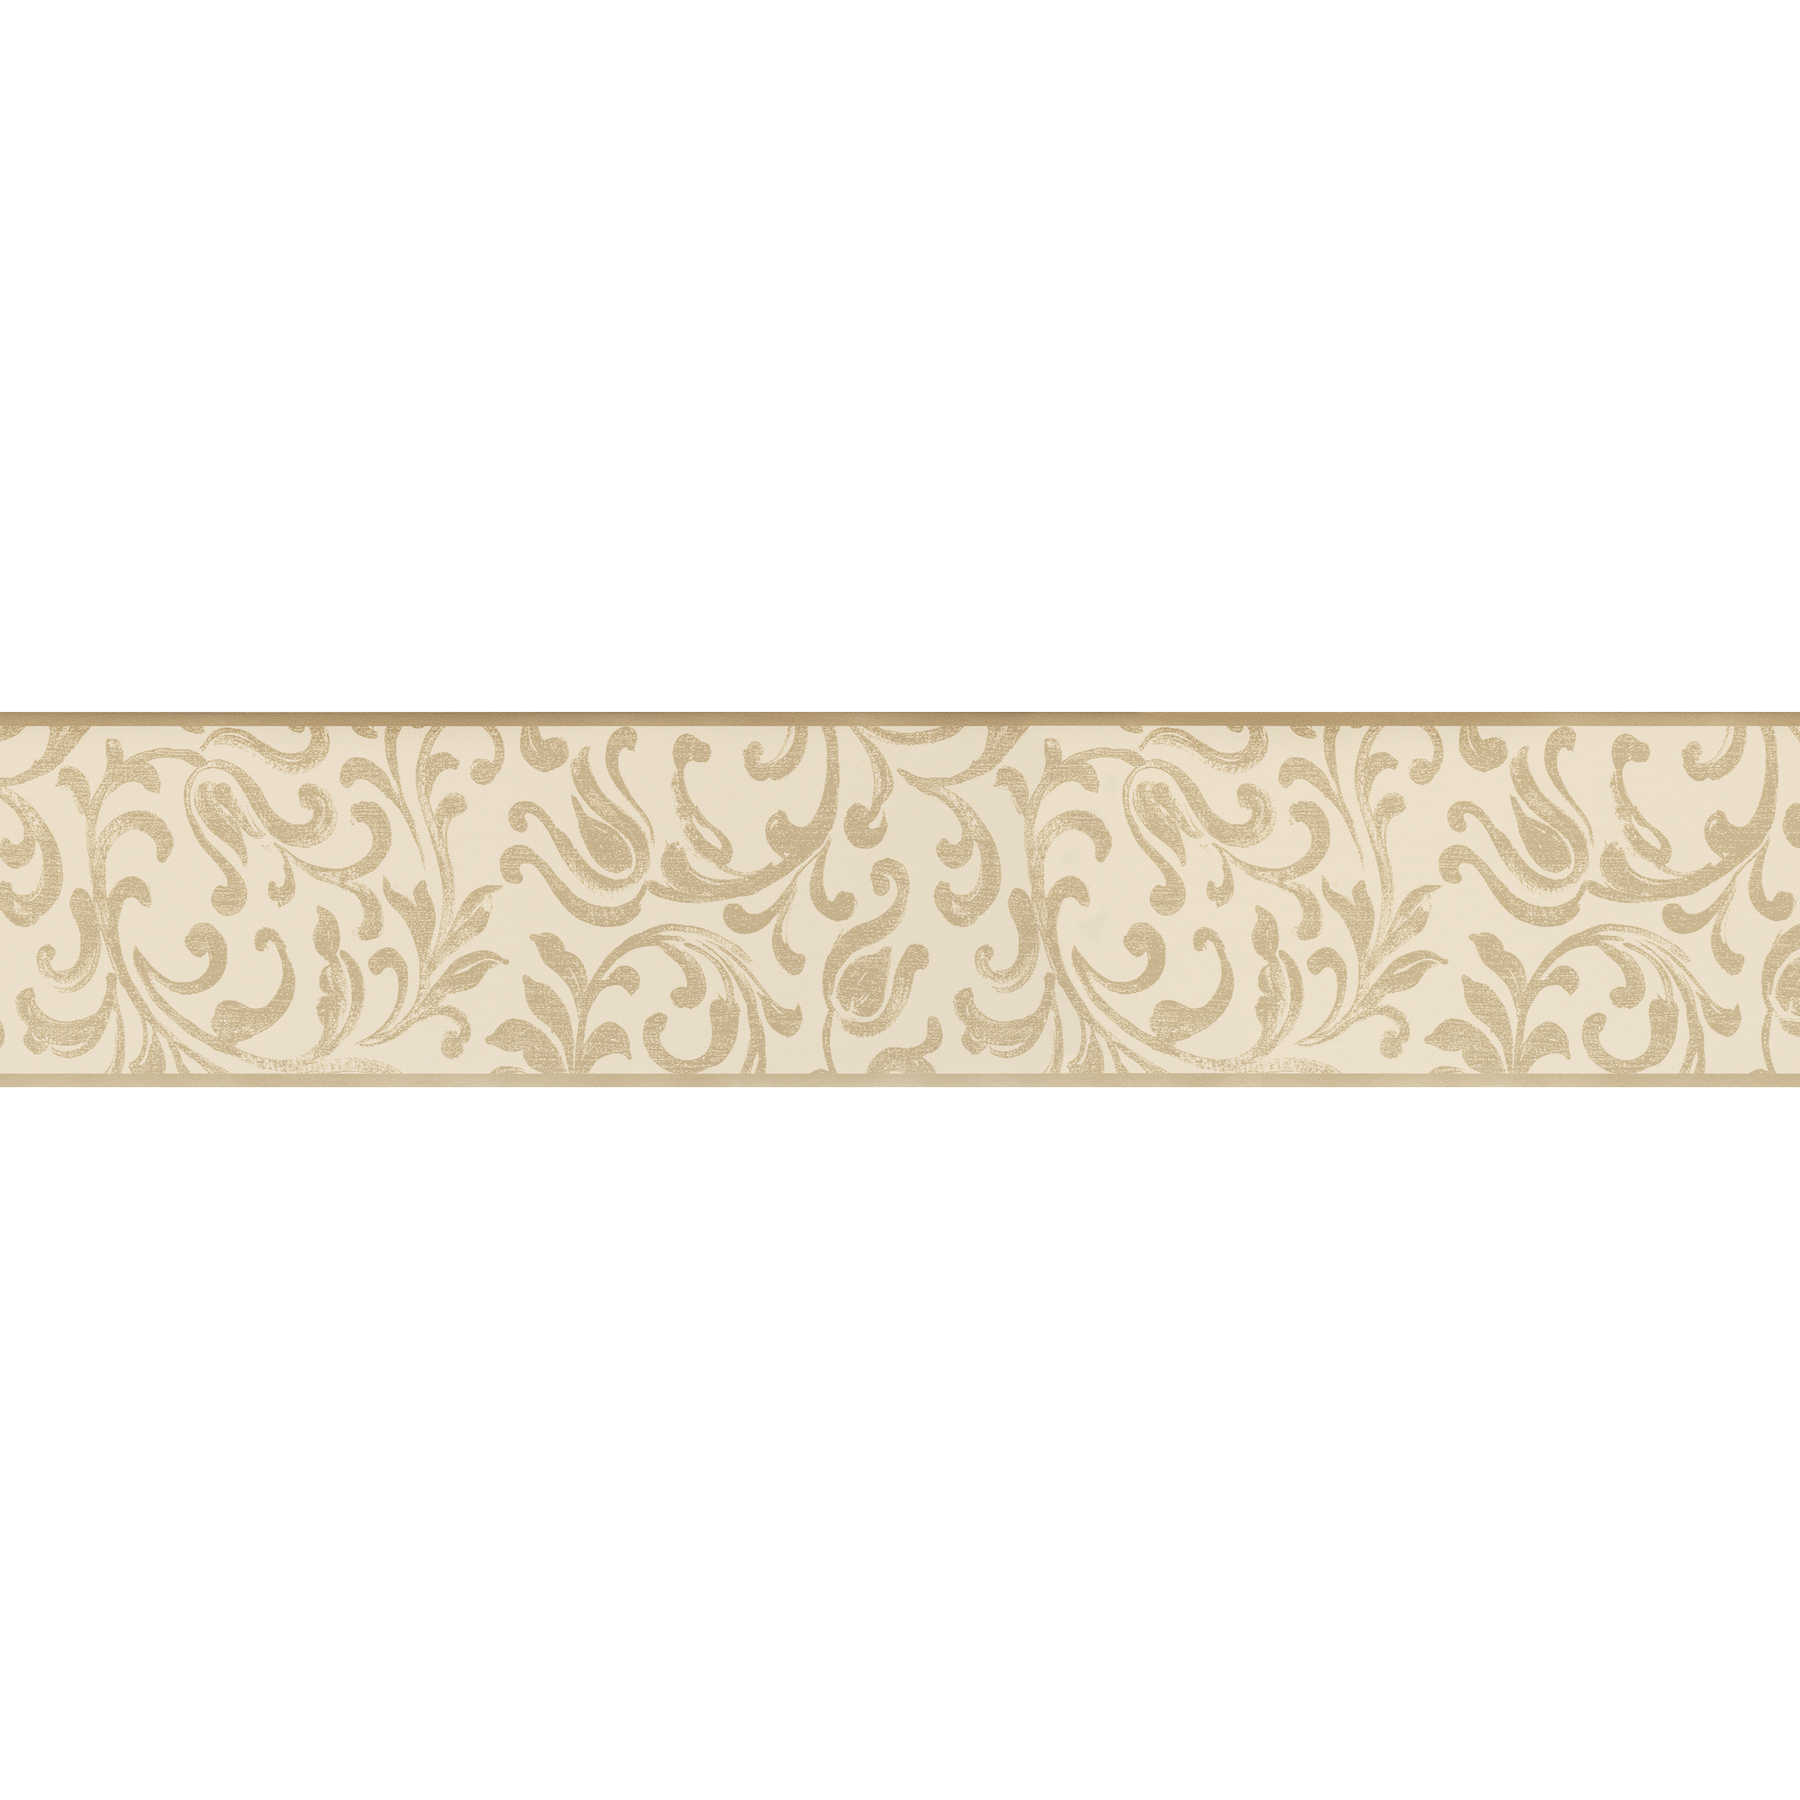         Wallpaper border floral vines in country style - beige
    